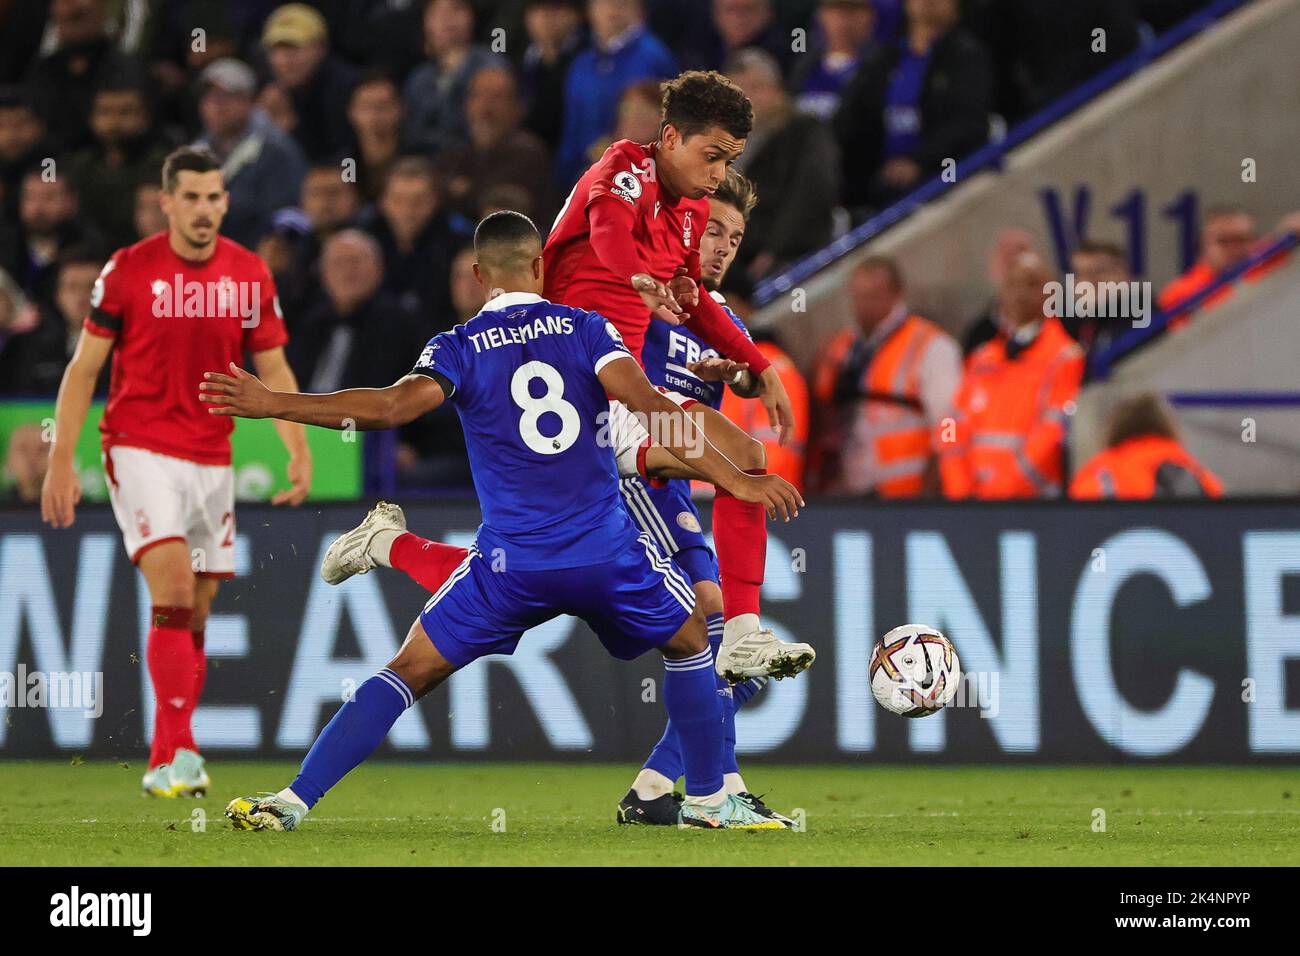 Brennan Johnson #20 of Nottingham Forest breaks past Youri Tielemans #8 of Leicester City during the Premier League match Leicester City vs Nottingham Forest at King Power Stadium, Leicester, United Kingdom, 3rd October 2022  (Photo by Mark Cosgrove/News Images) Stock Photo